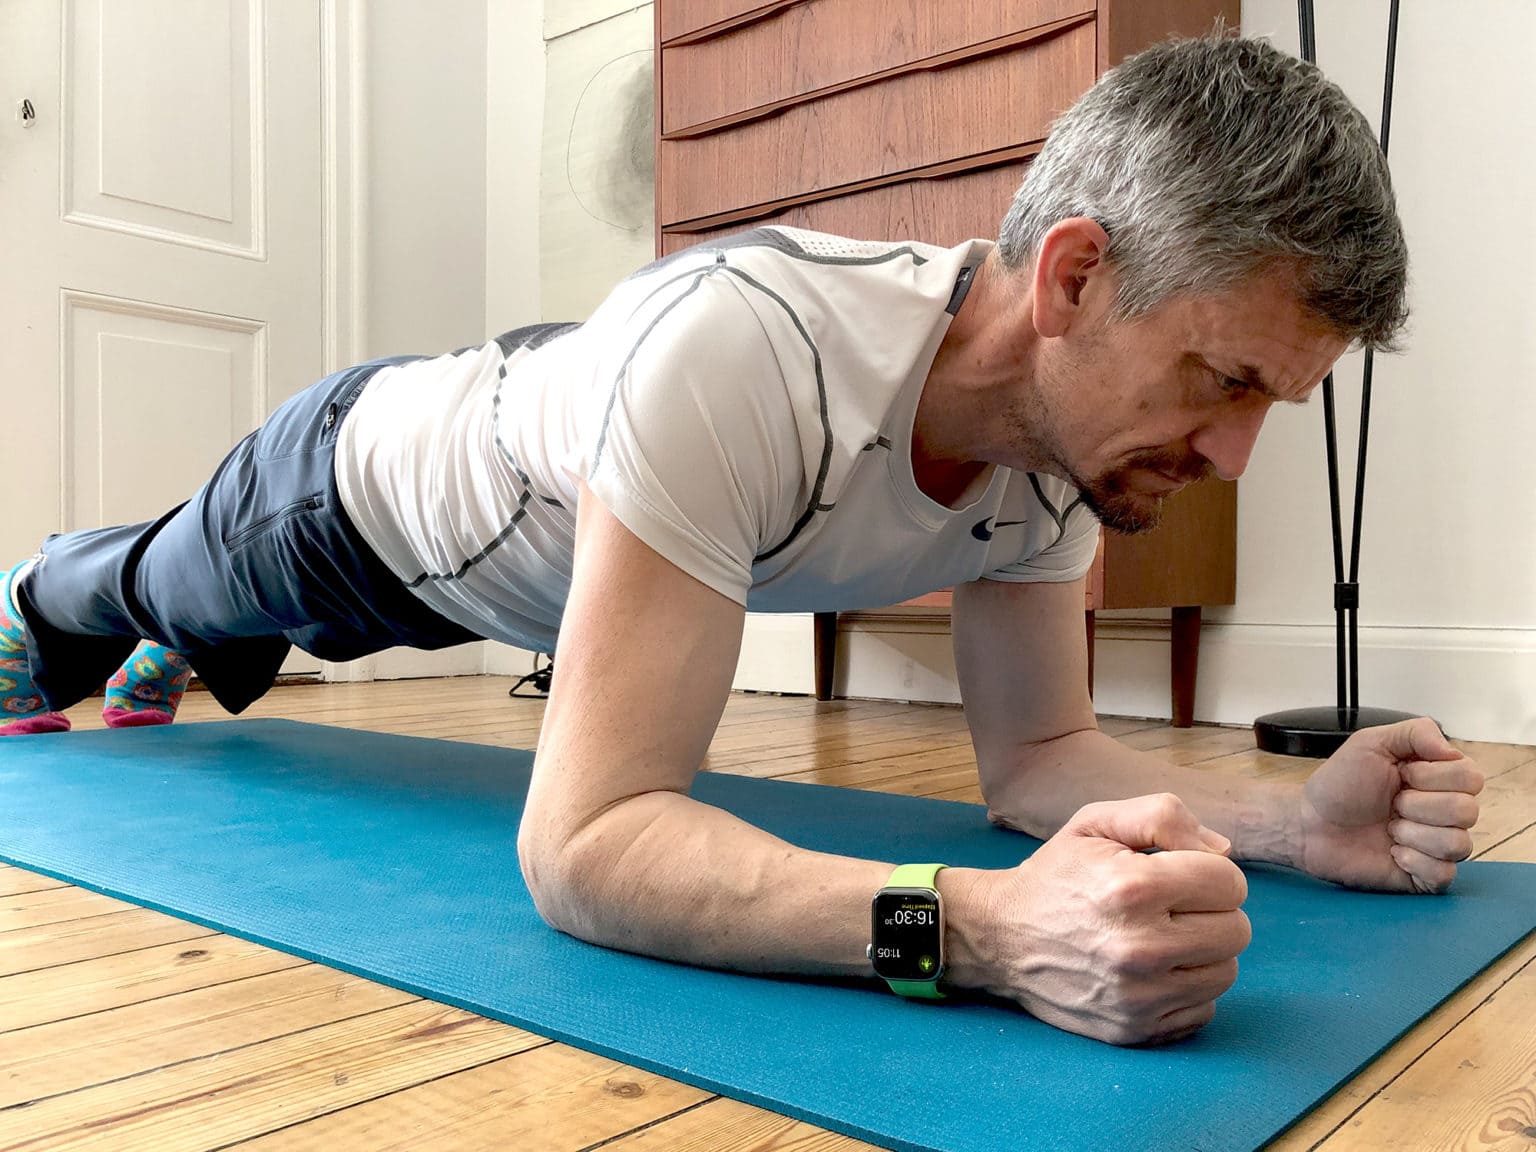 Our essential guide to building rock-hard abs (with a little help from Apple Watch).